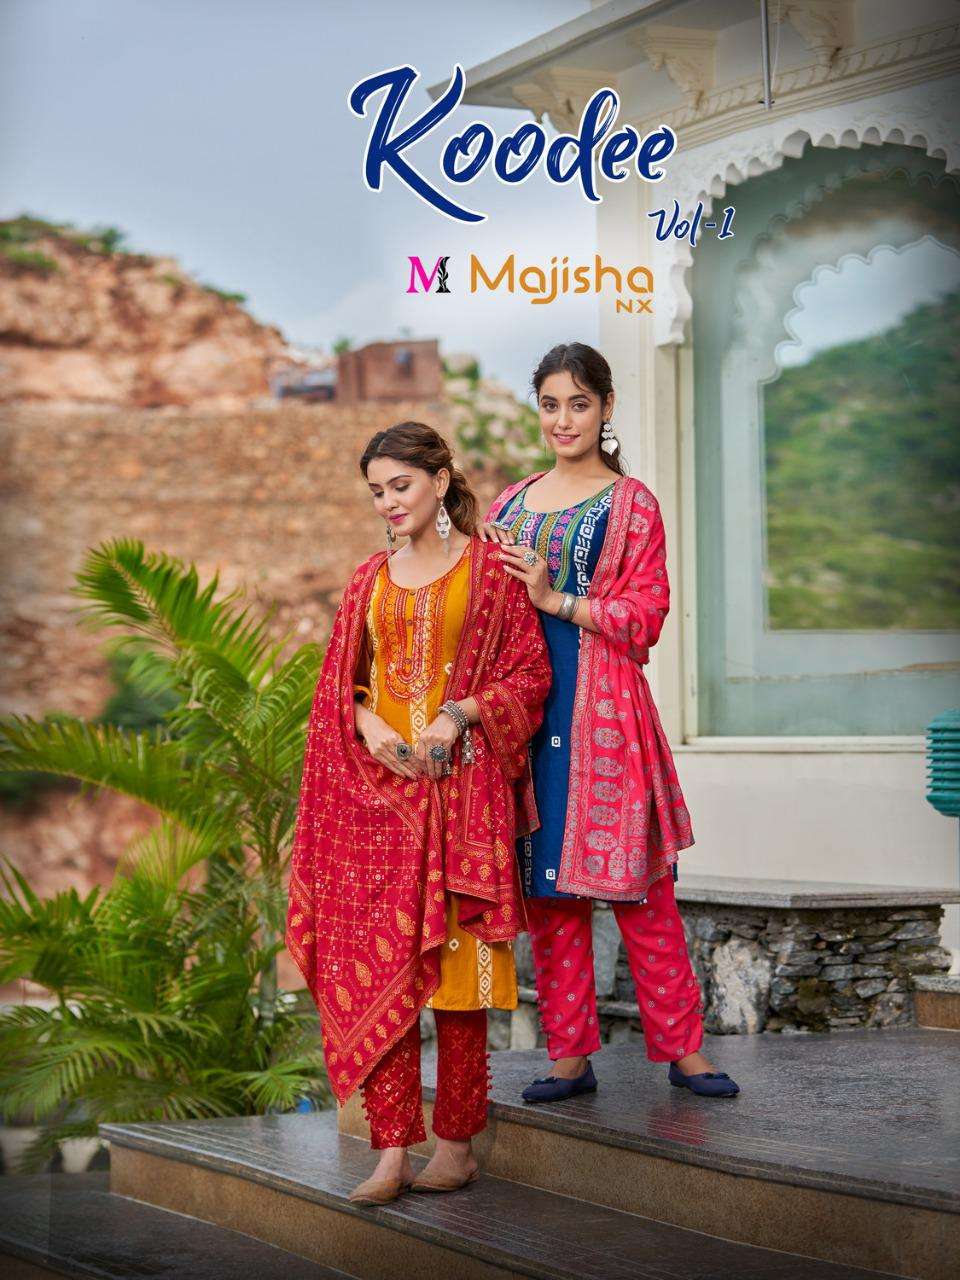 KOODEE VOL-1 BY MAJISHA NX 1001 TO 1008 SERIES BEAUTIFUL SUITS COLORFUL STYLISH FANCY CASUAL WEAR & ETHNIC WEAR PURE RAYON PRINT DRESSES AT WHOLESALE PRICE